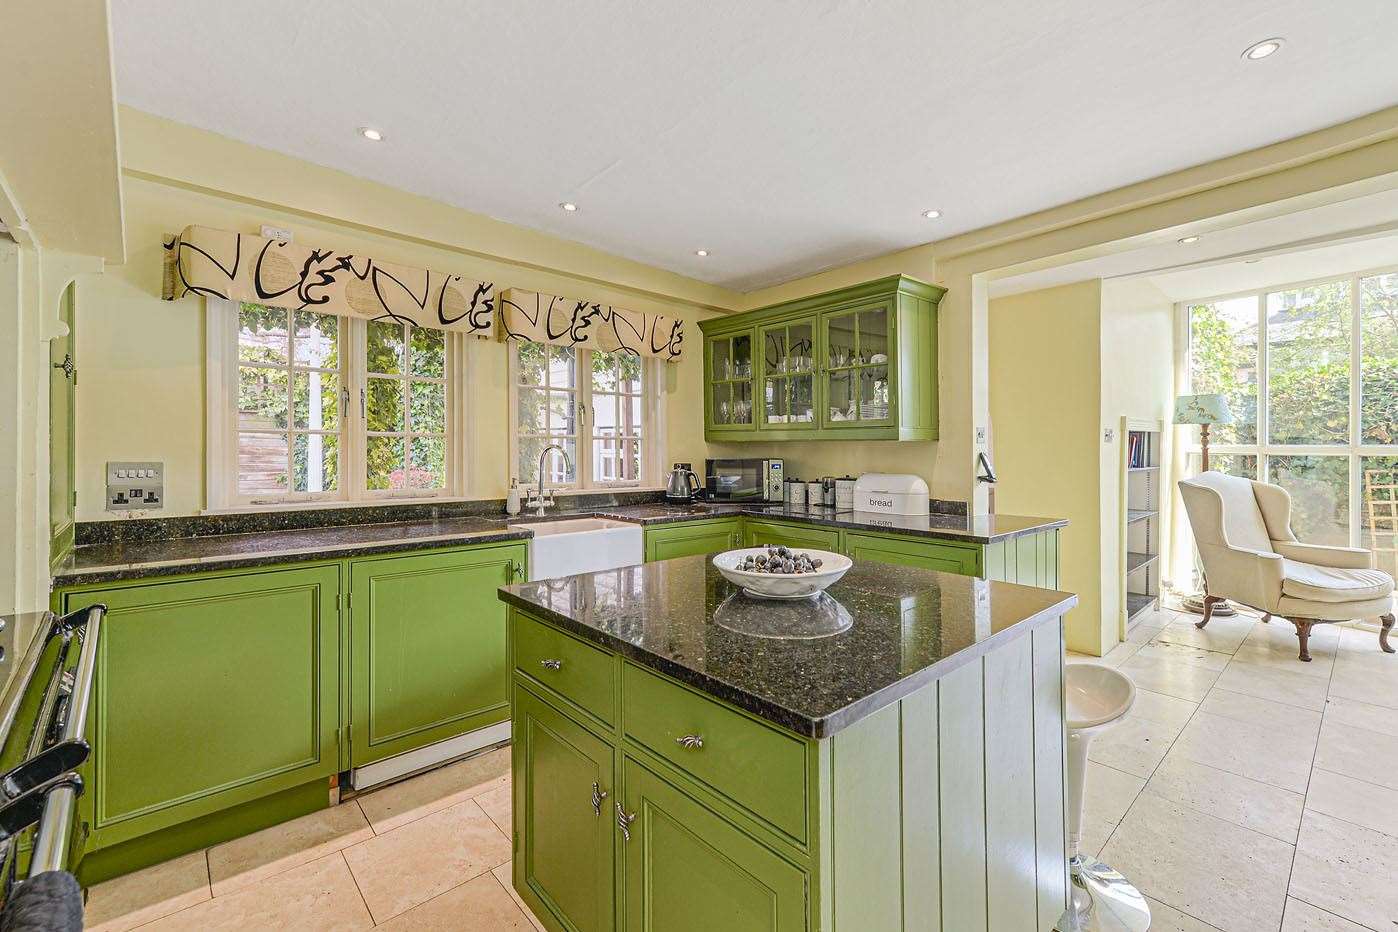 The bespoke kitchen Picture: Fine & Country